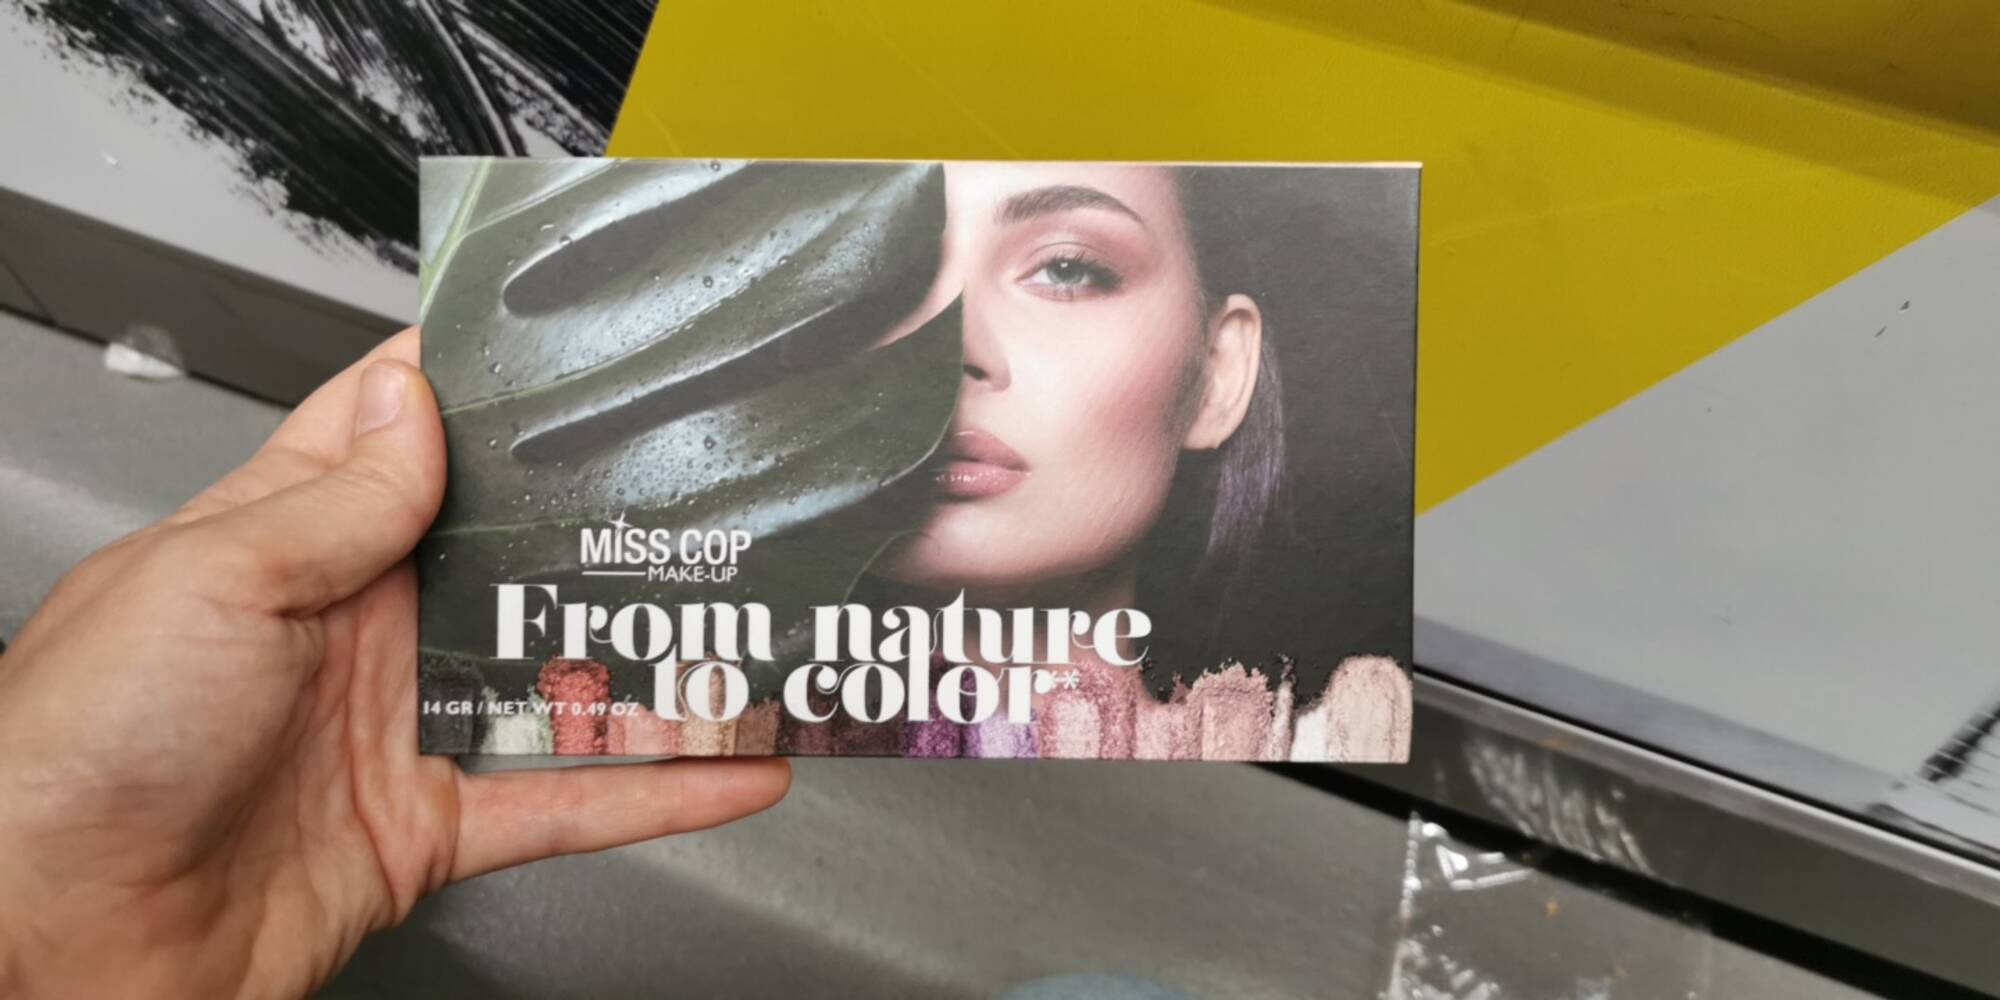 MISS COP - from nature to color